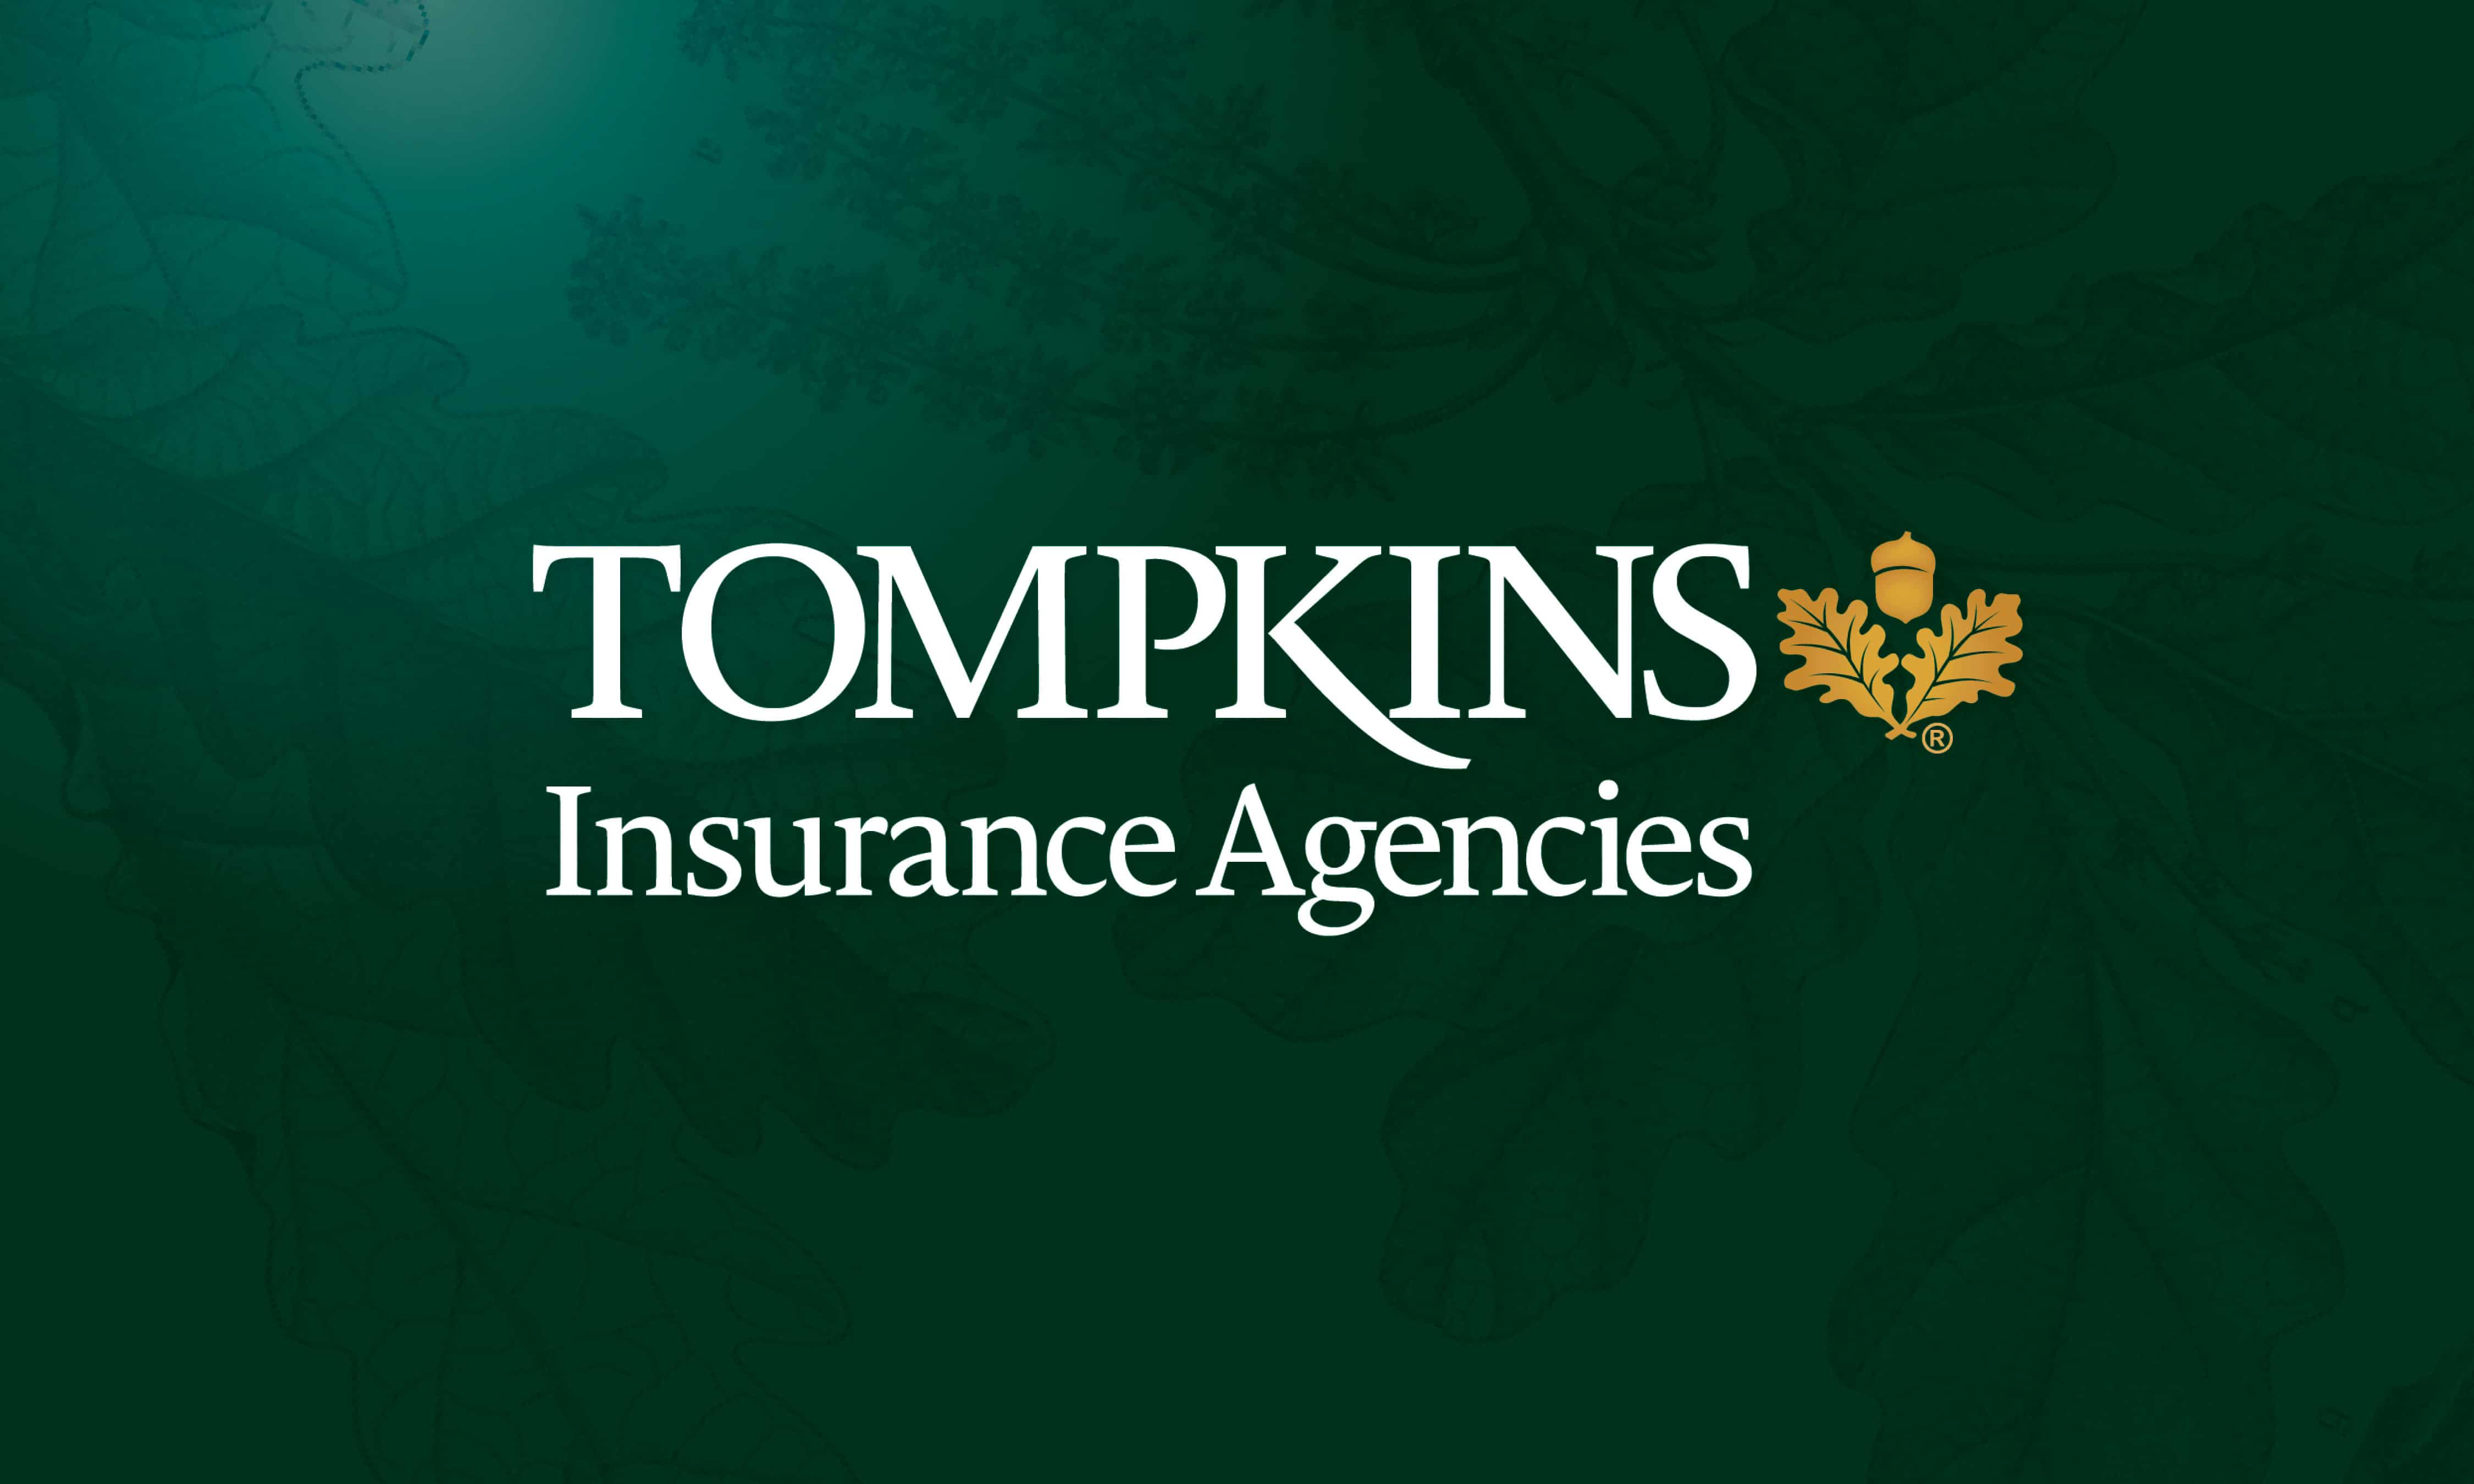 Tompkins Insurance Names Lou Atti Personal Insurance Manager